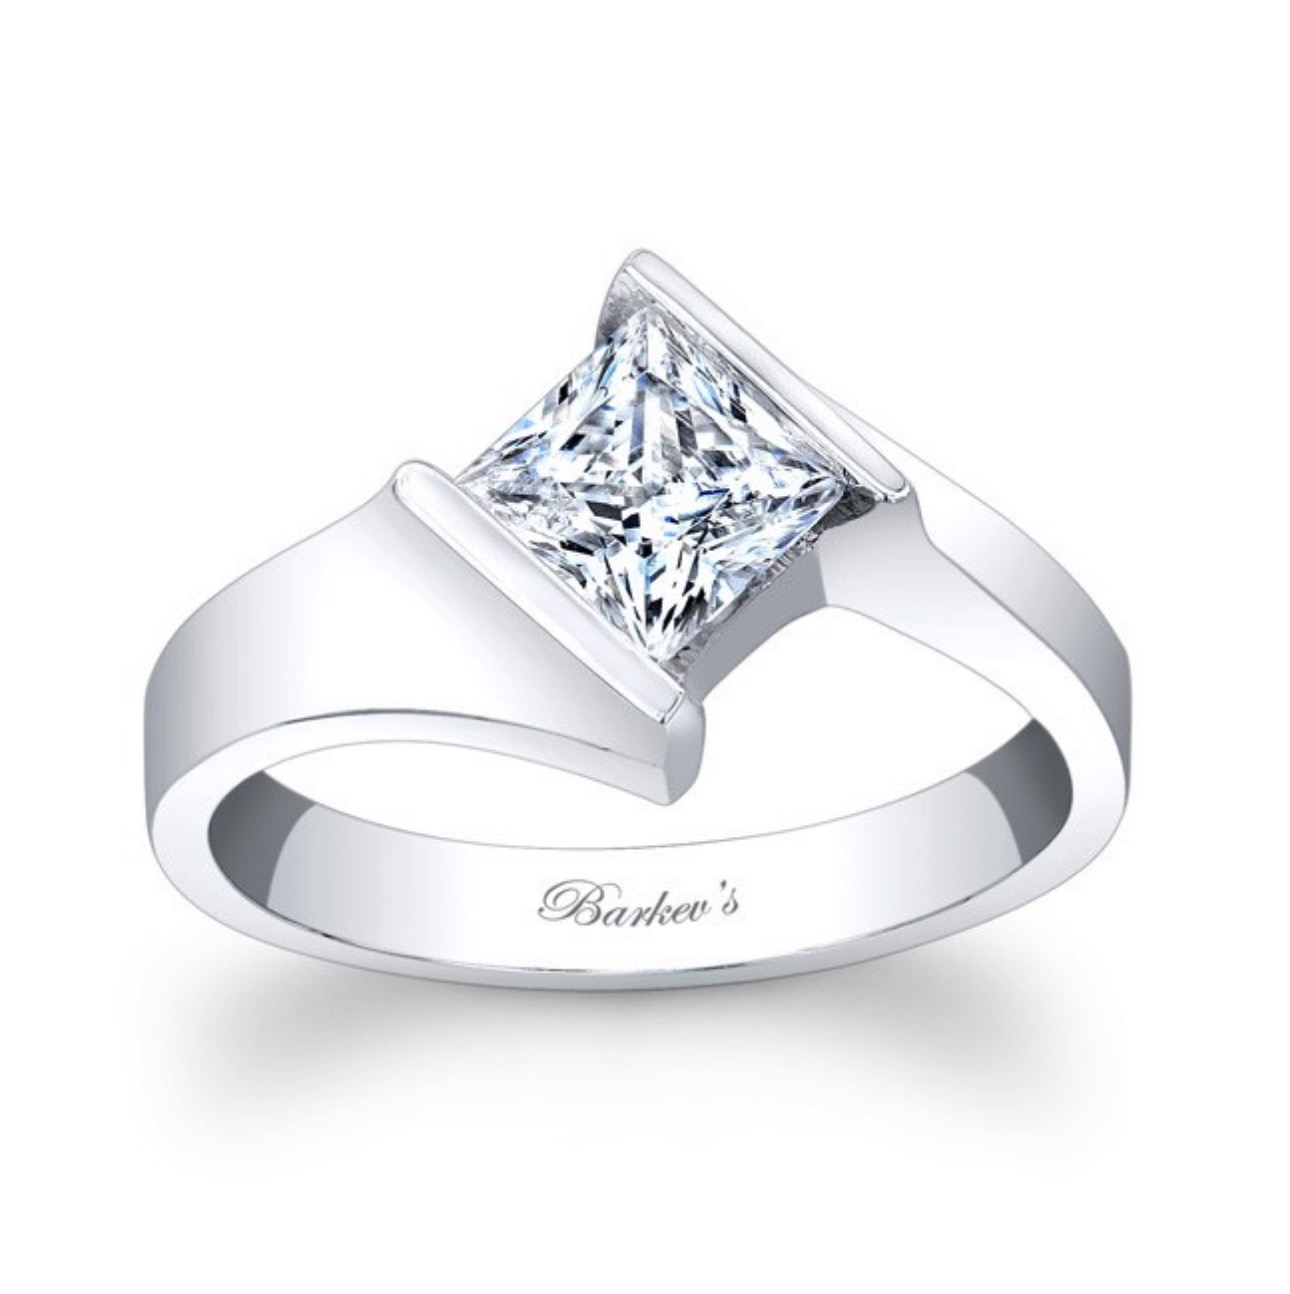 Princess Cut Solitaire Ring - 14K White Gold